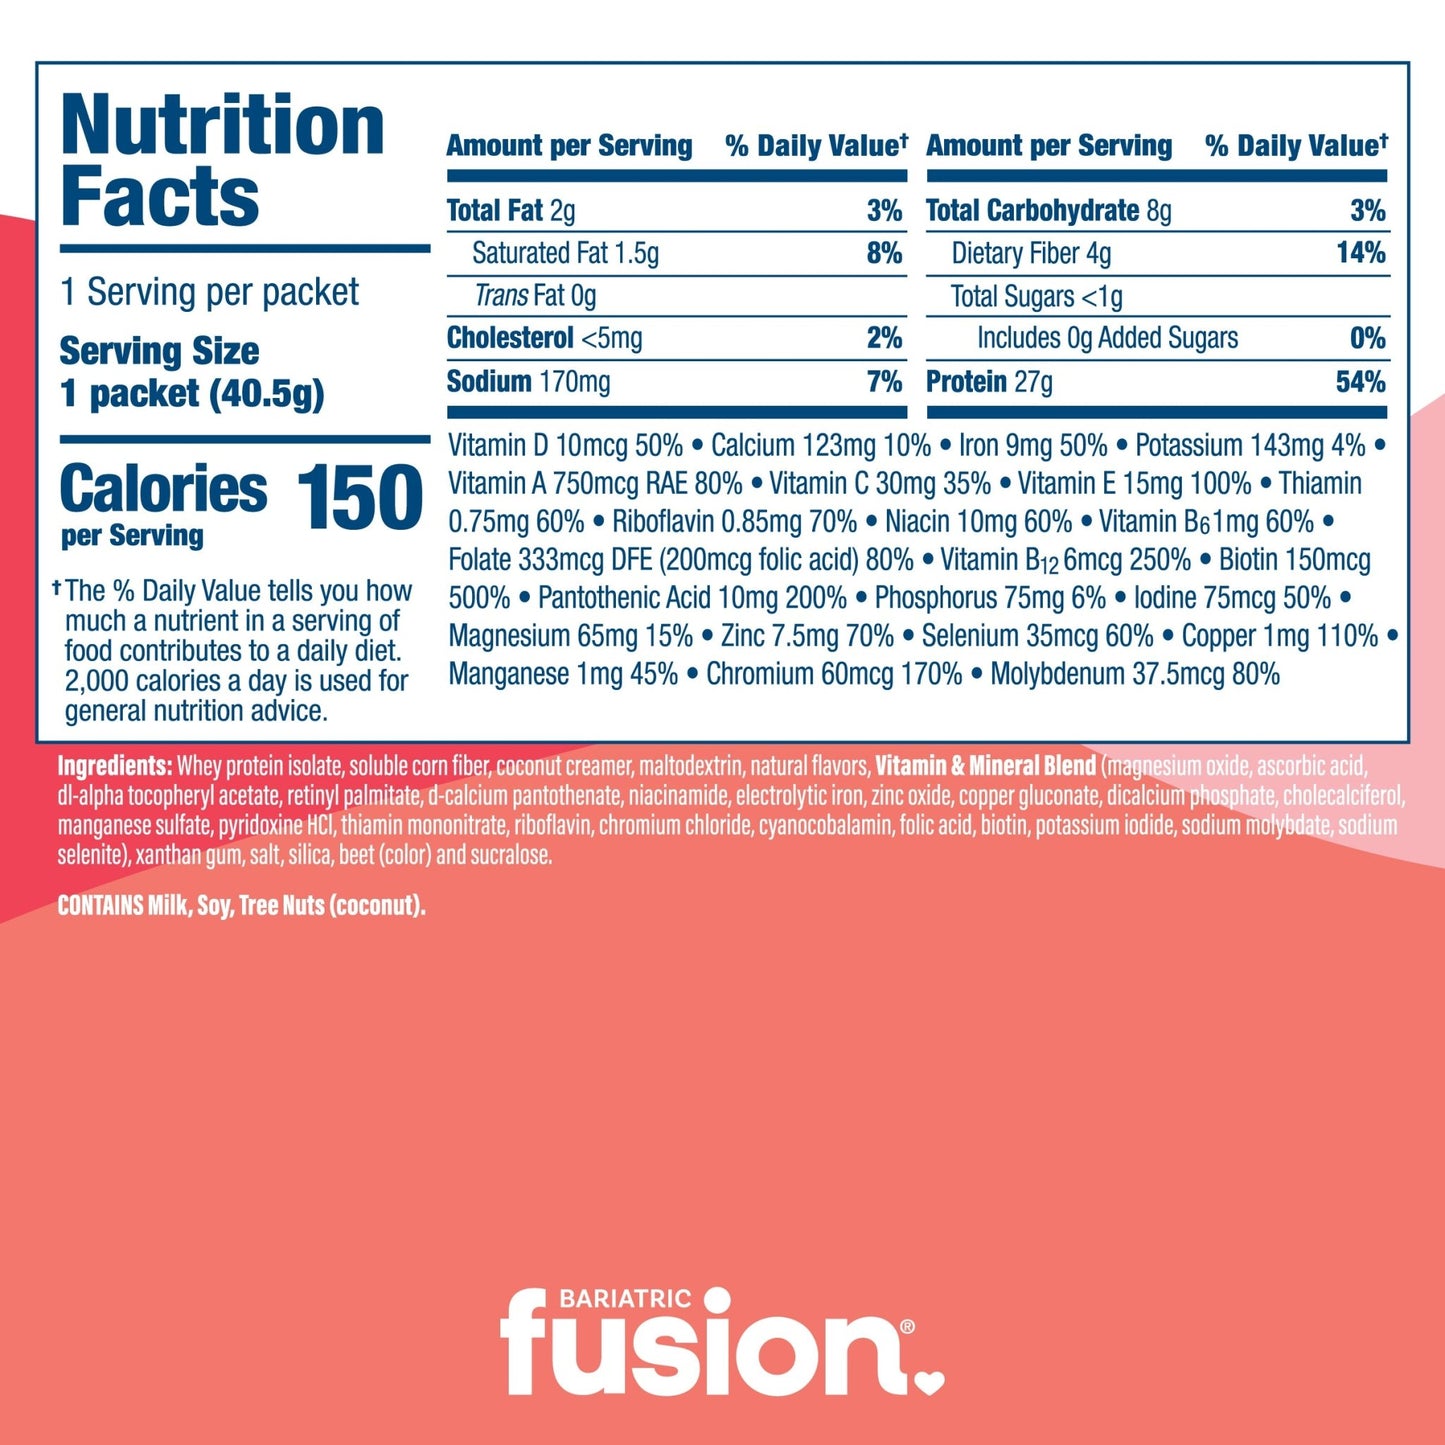 Bariatric Fusion Strawberry Banana High Protein Meal Replacement single serving nutrition facts.